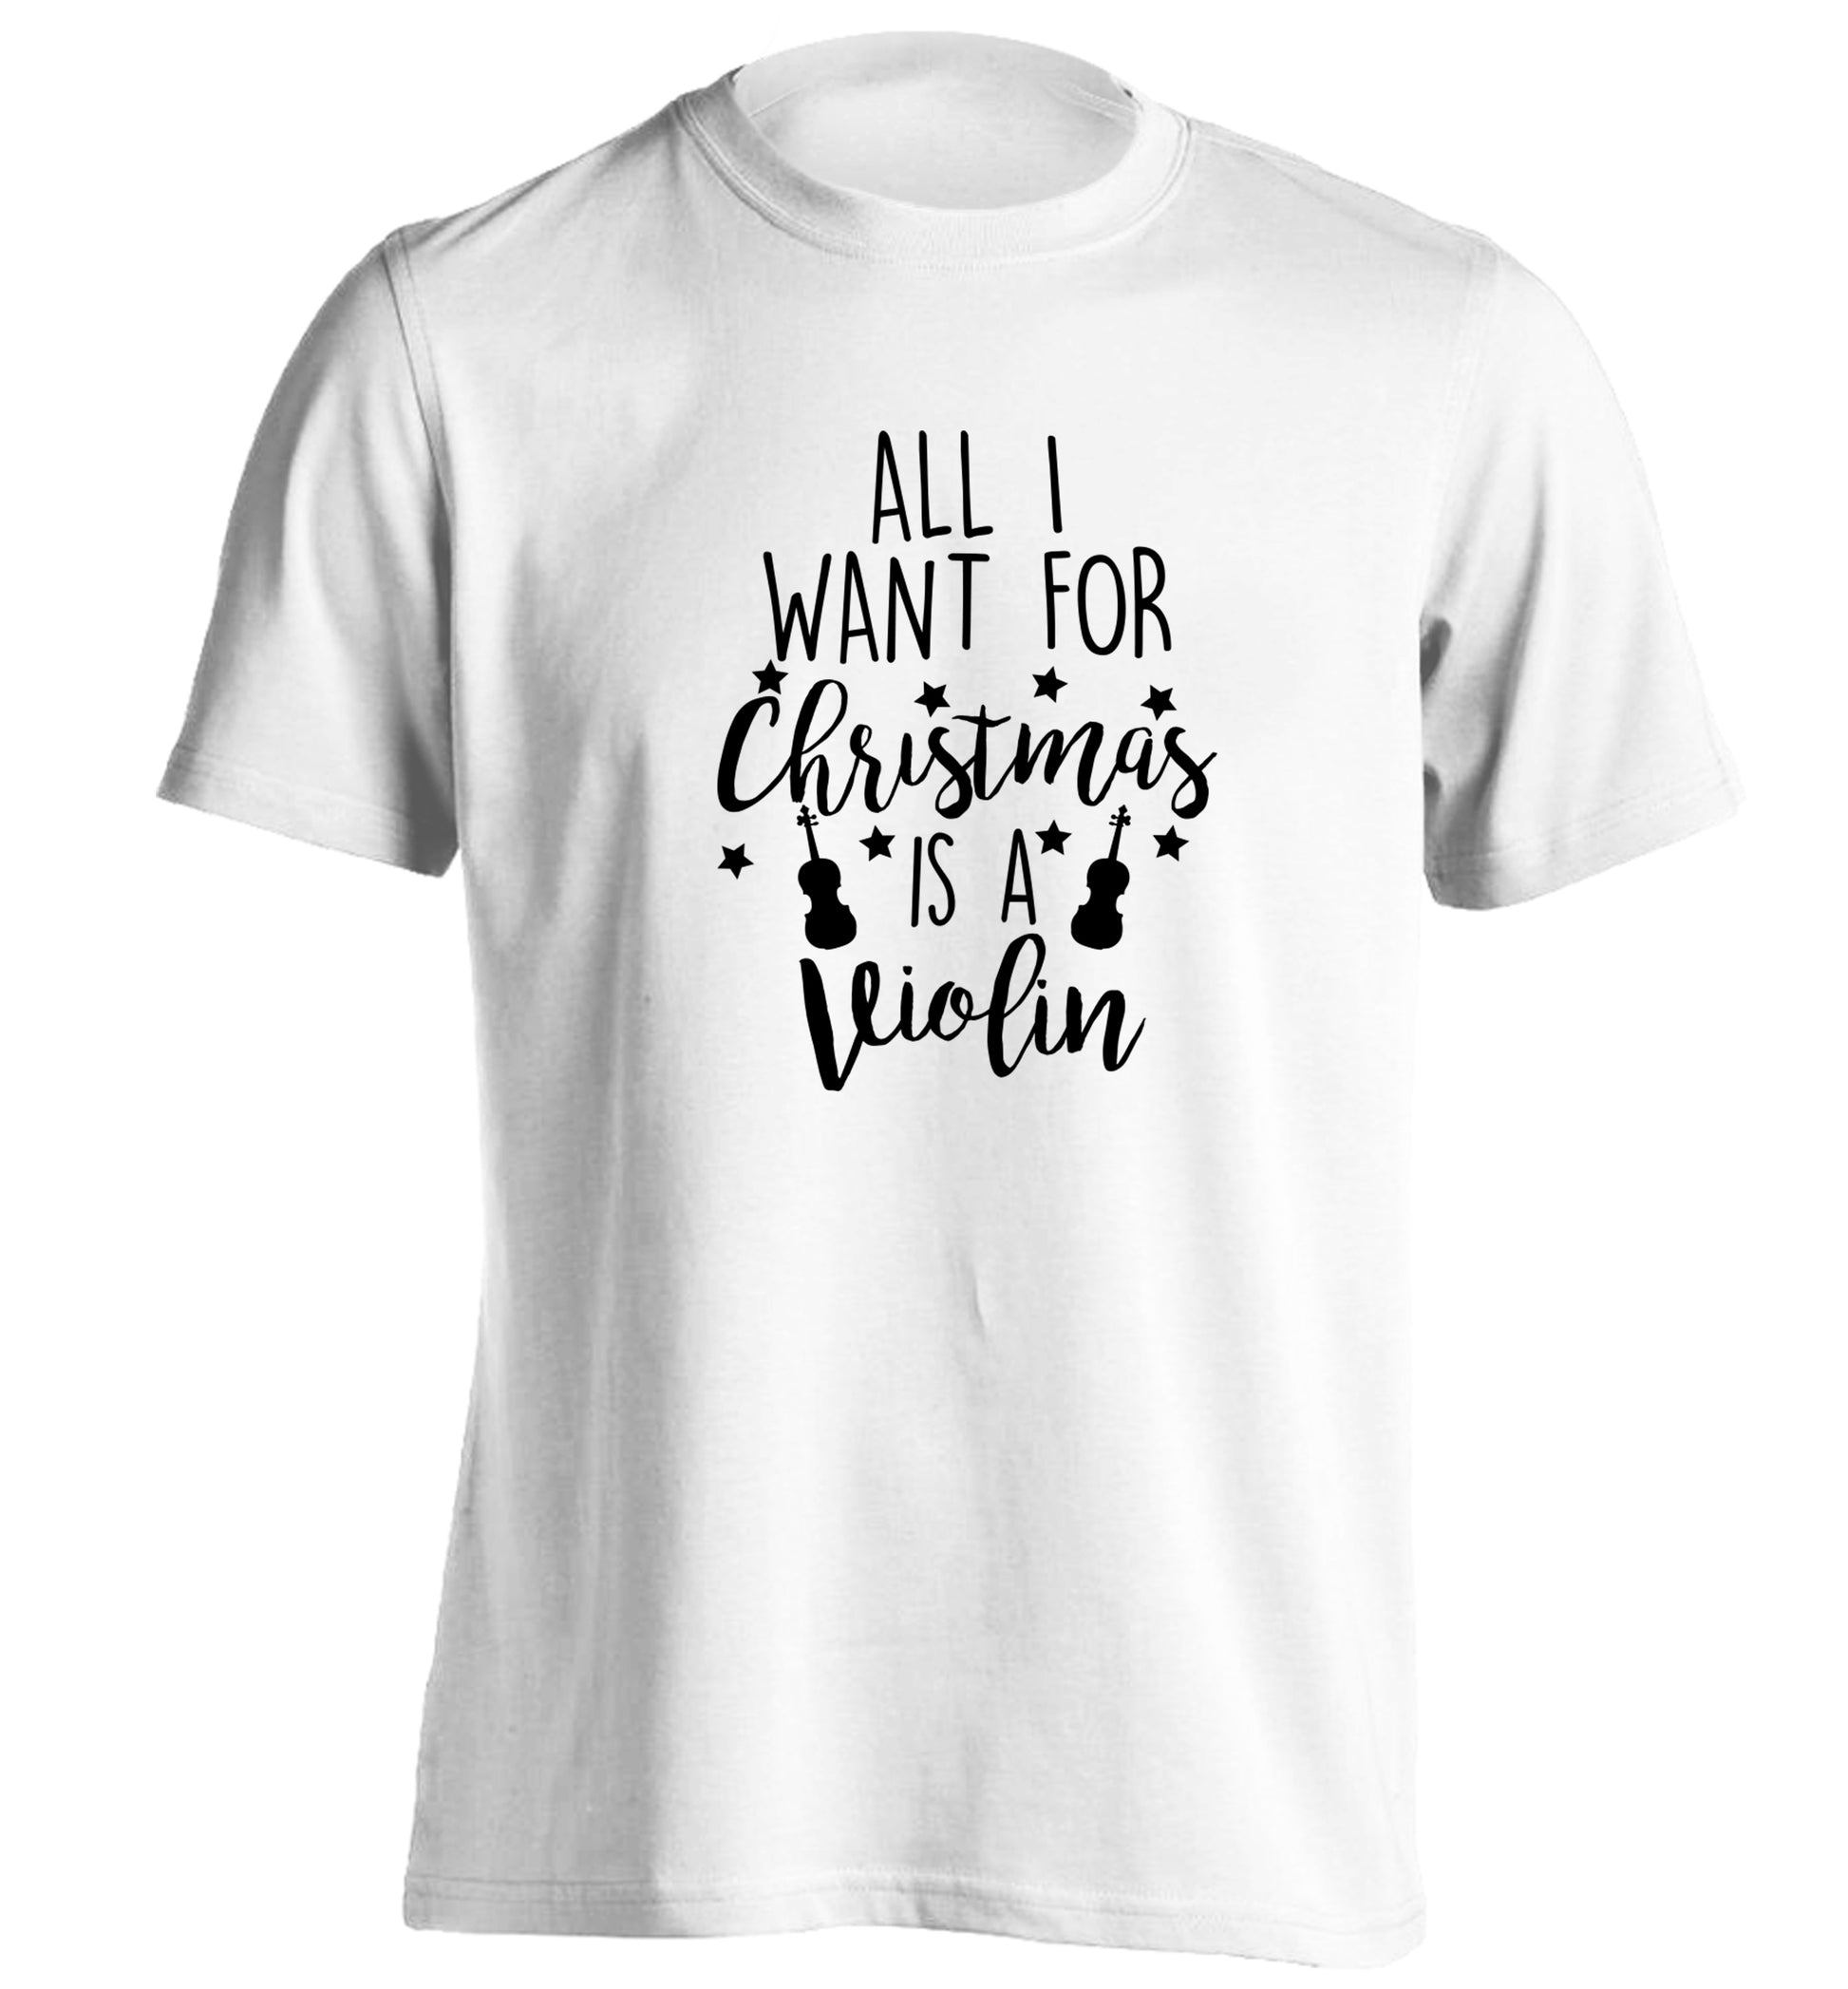 All I Want For Christmas is a Violin adults unisex white Tshirt 2XL